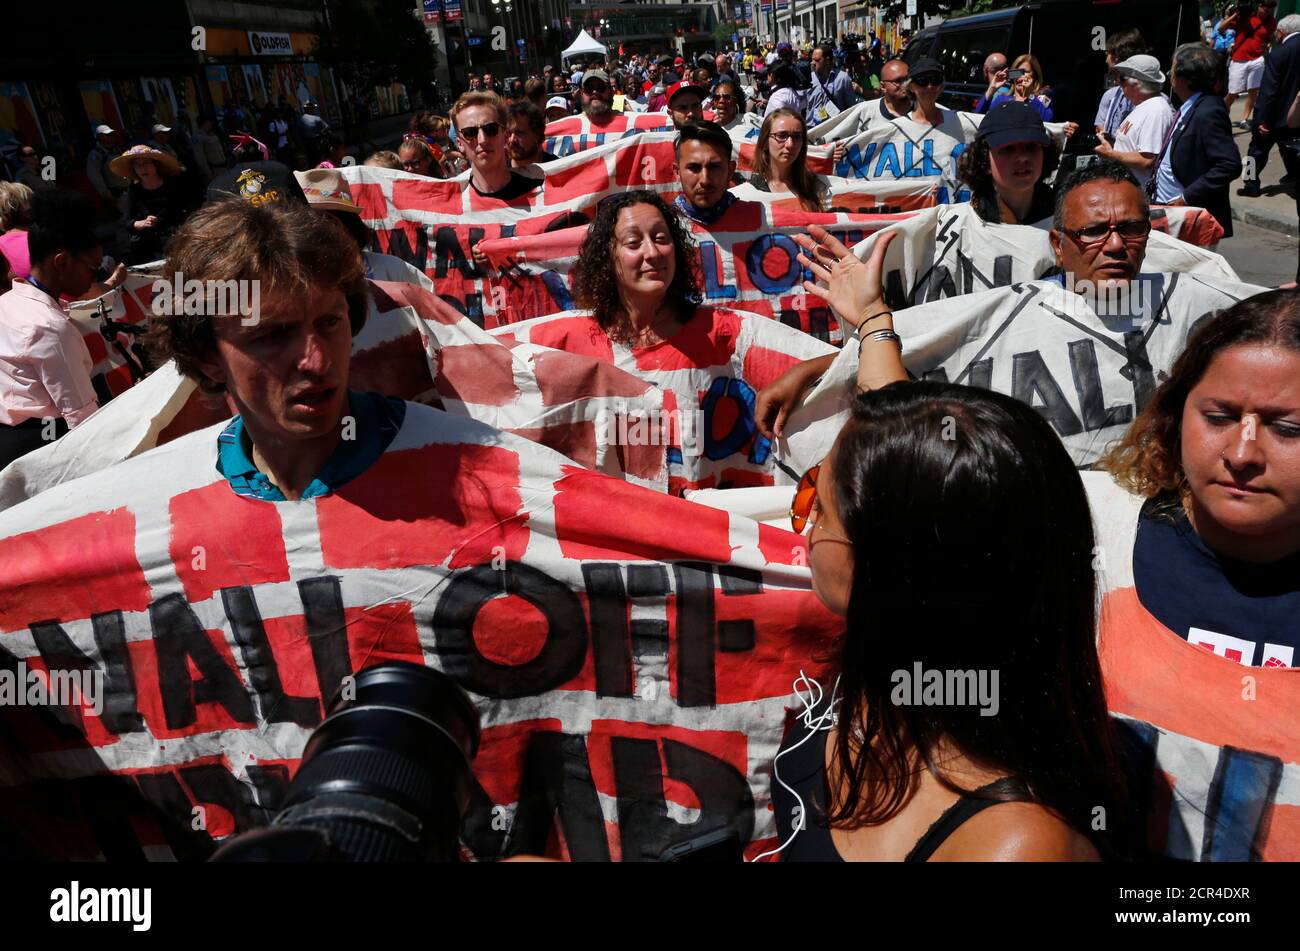 Demonstrators protesting against the immigration policies of Republican U.S. presidential nominee Donald Trump march outside the arena hosting the Republican National Convention in Cleveland, Ohio, U.S. July 19, 2016.         REUTERS/Lucas Jackson Stock Photo